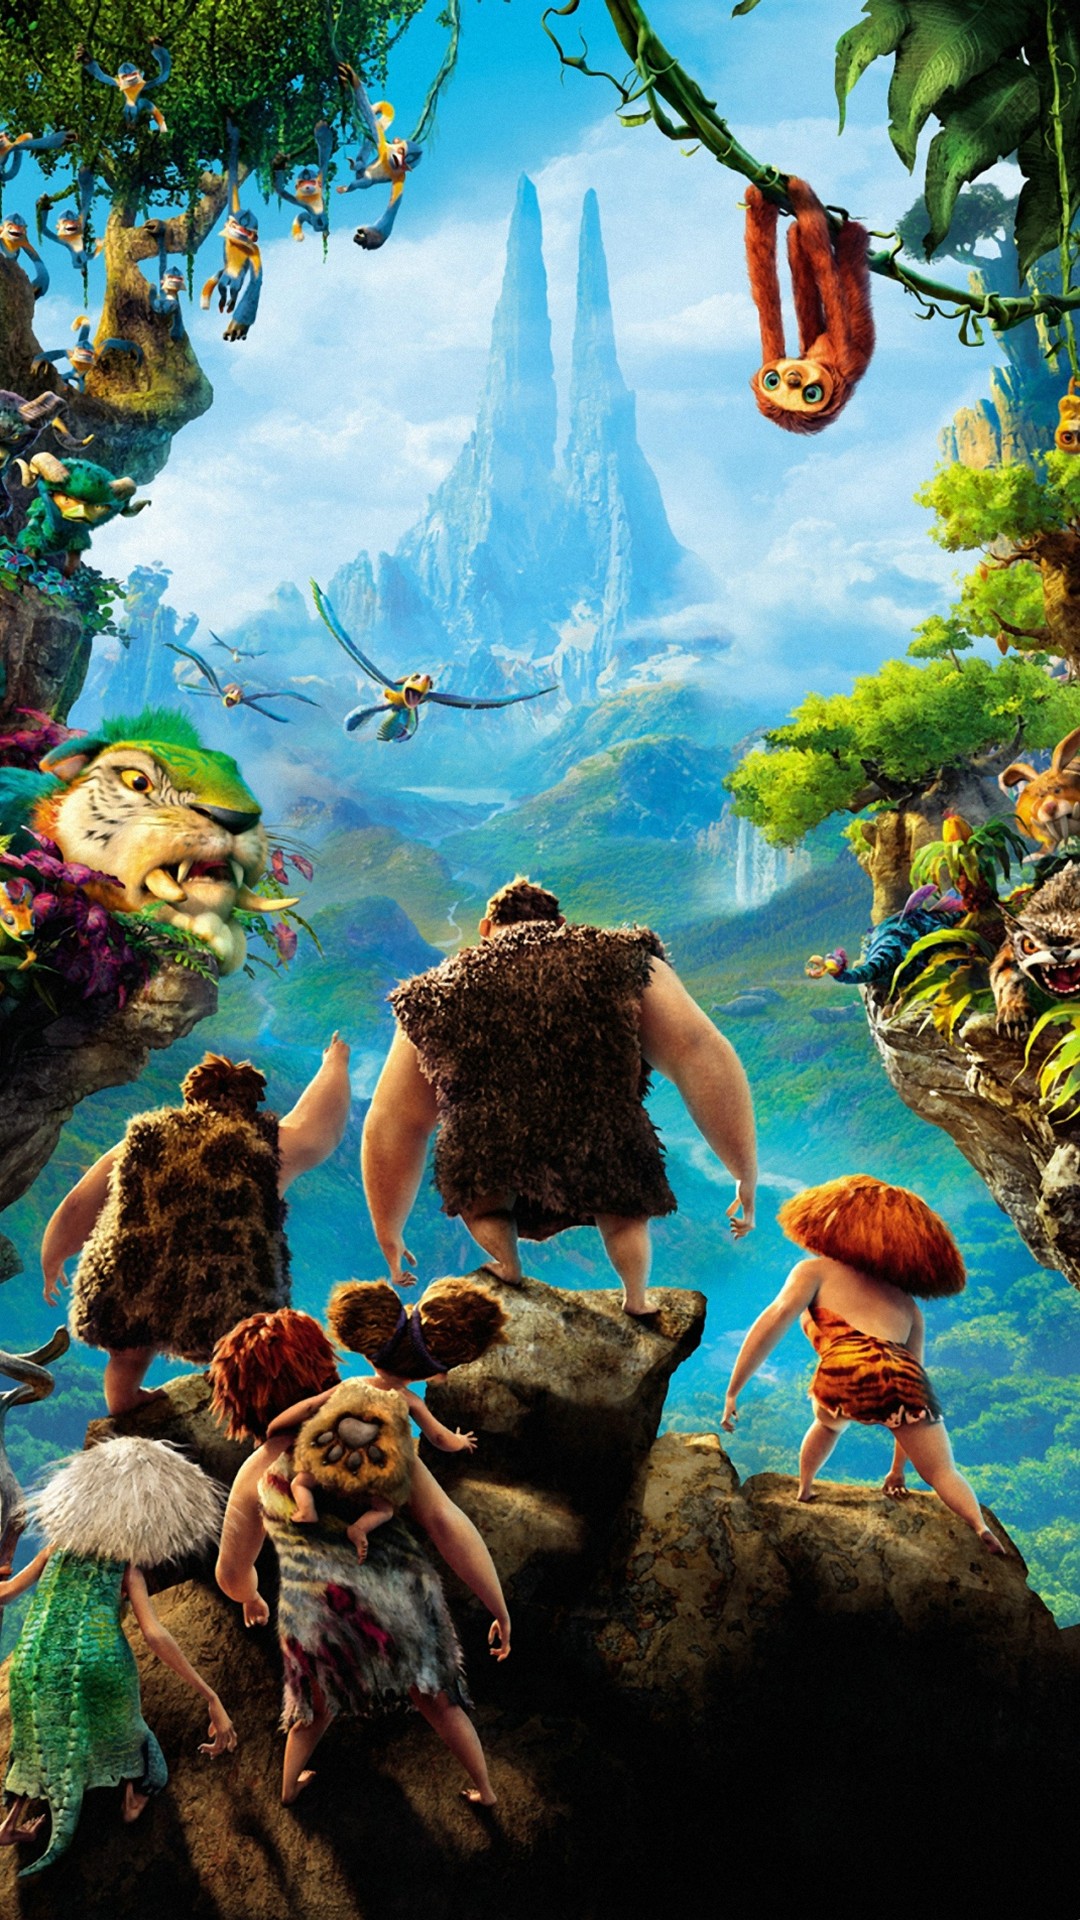 Animated Movies Android Wallpaper Hd With Hd Resolution - Animation Movie  Wallpaper For Android - 1080x1920 Wallpaper 